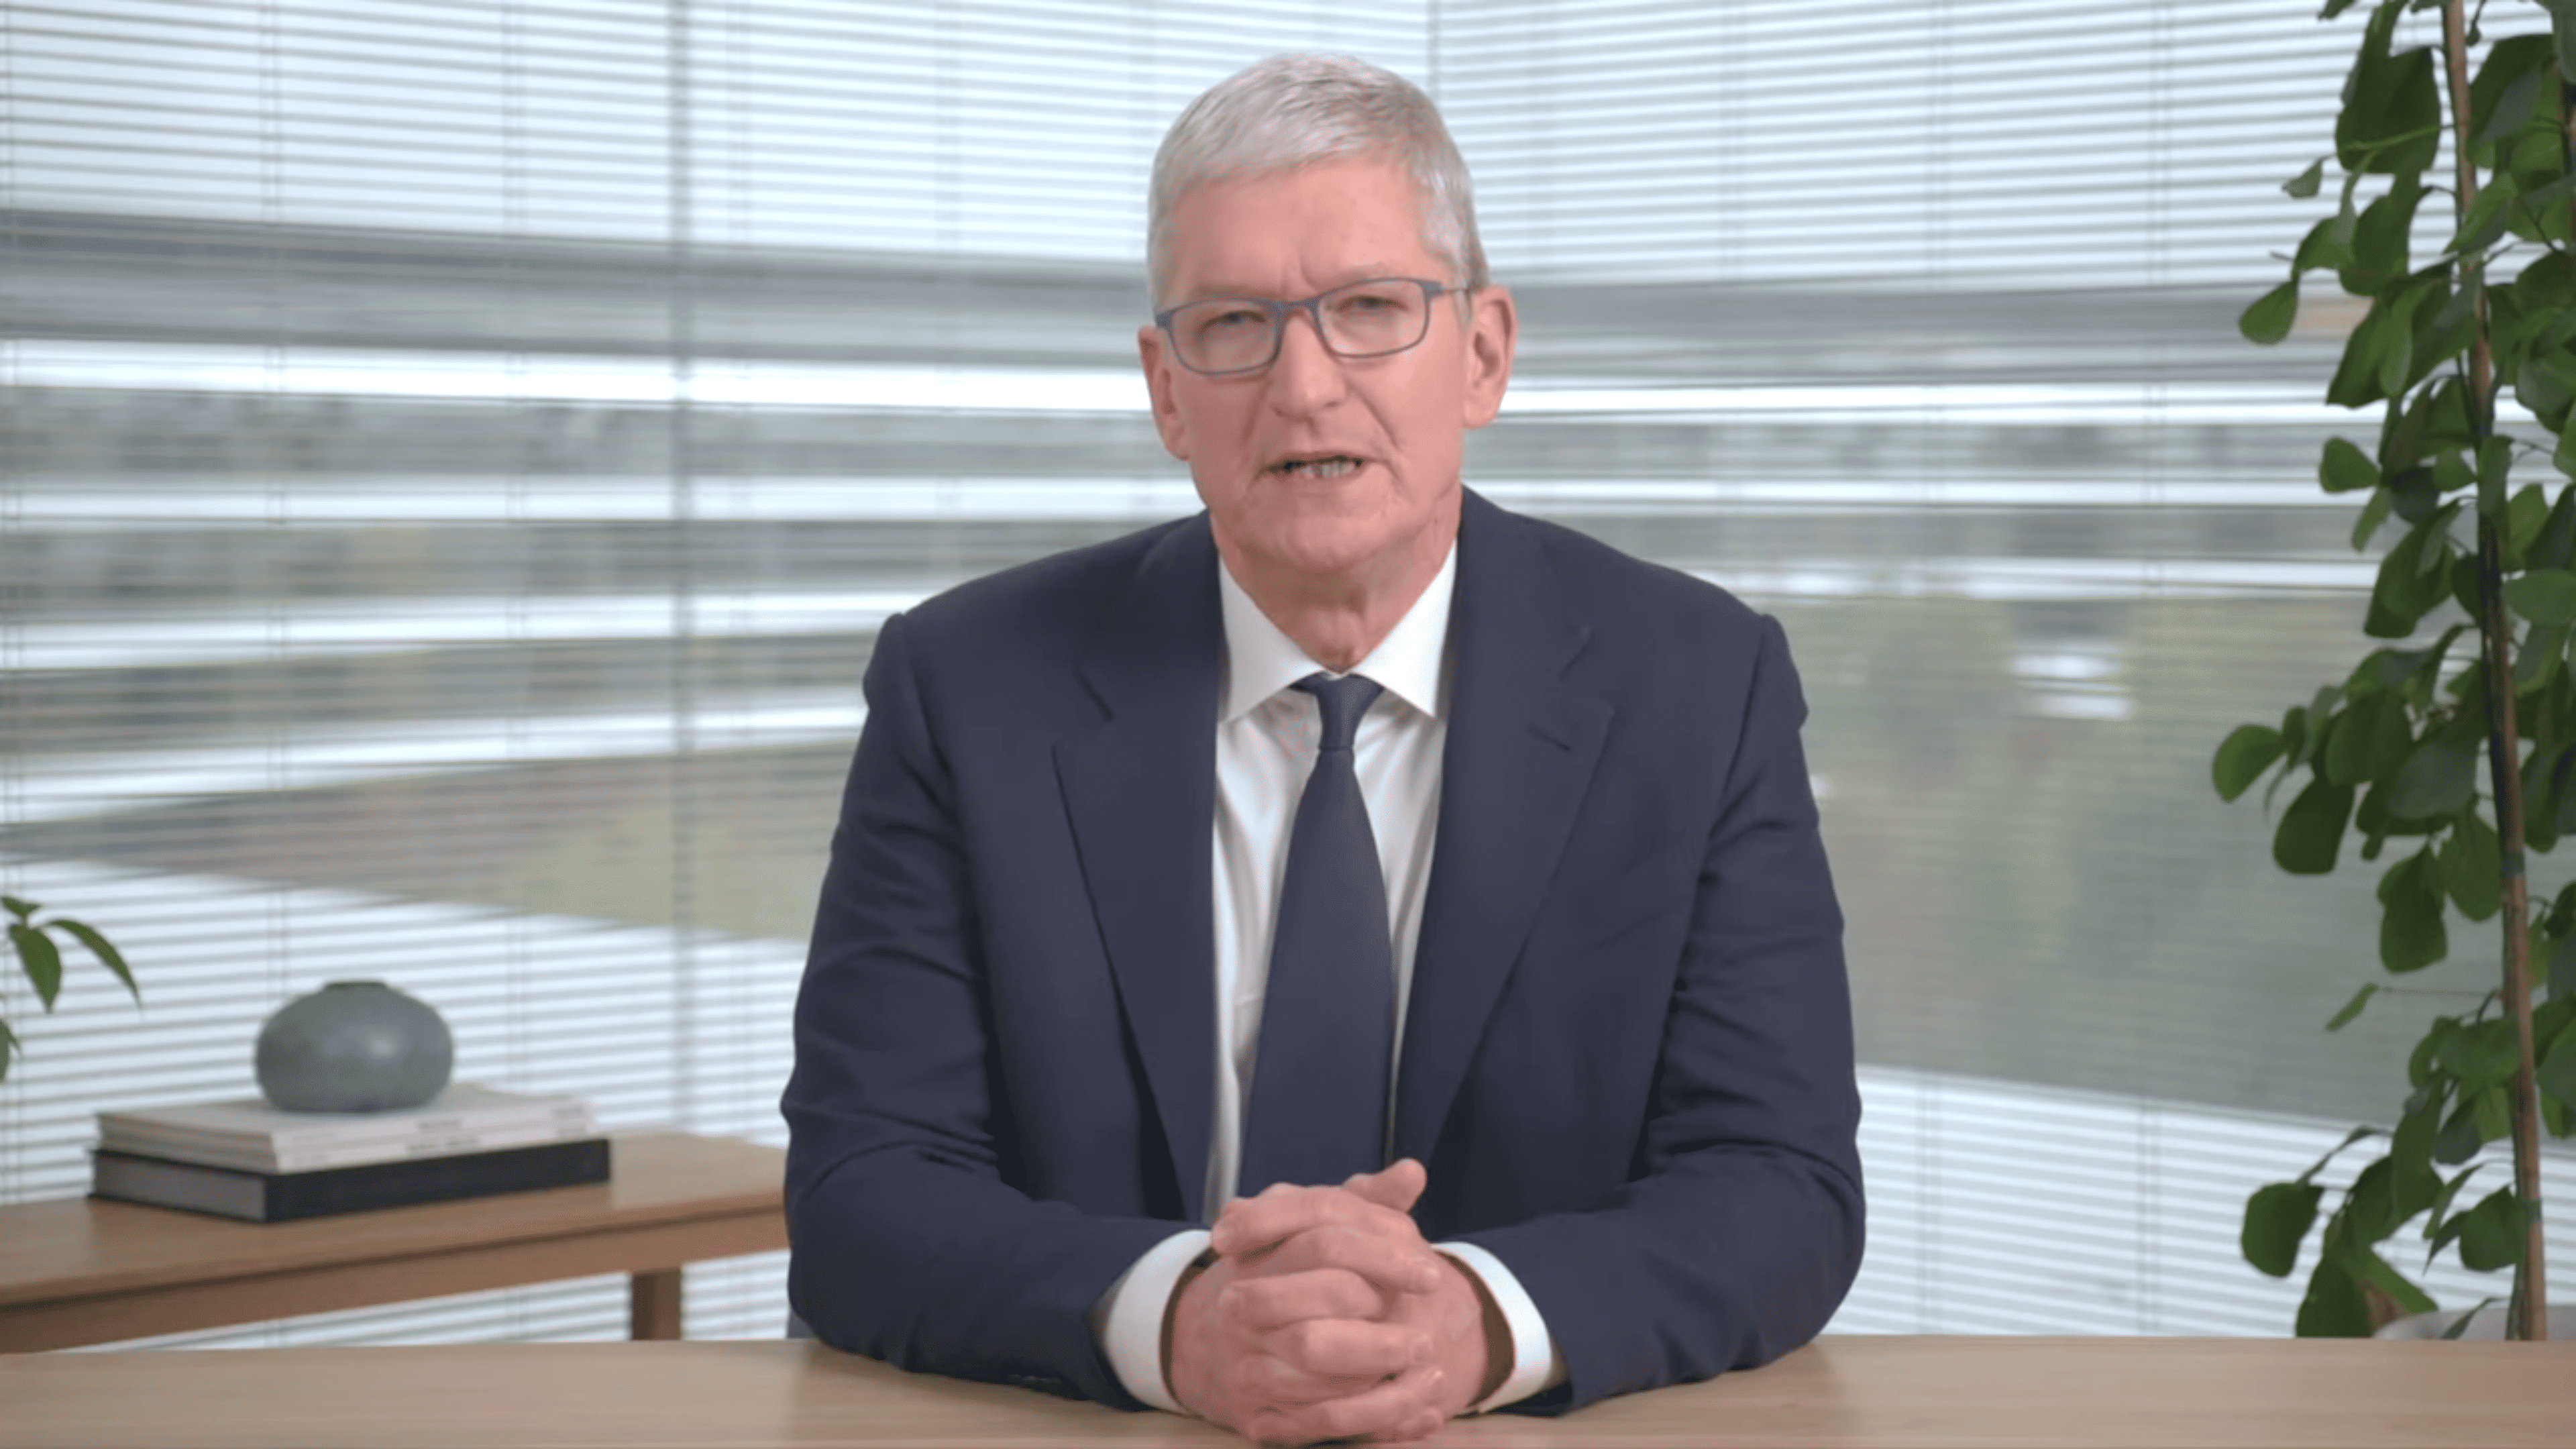 Investor Tells Tim Cook – ‘The Time Has Come to Change Apple’s Approach’ to Antitrust